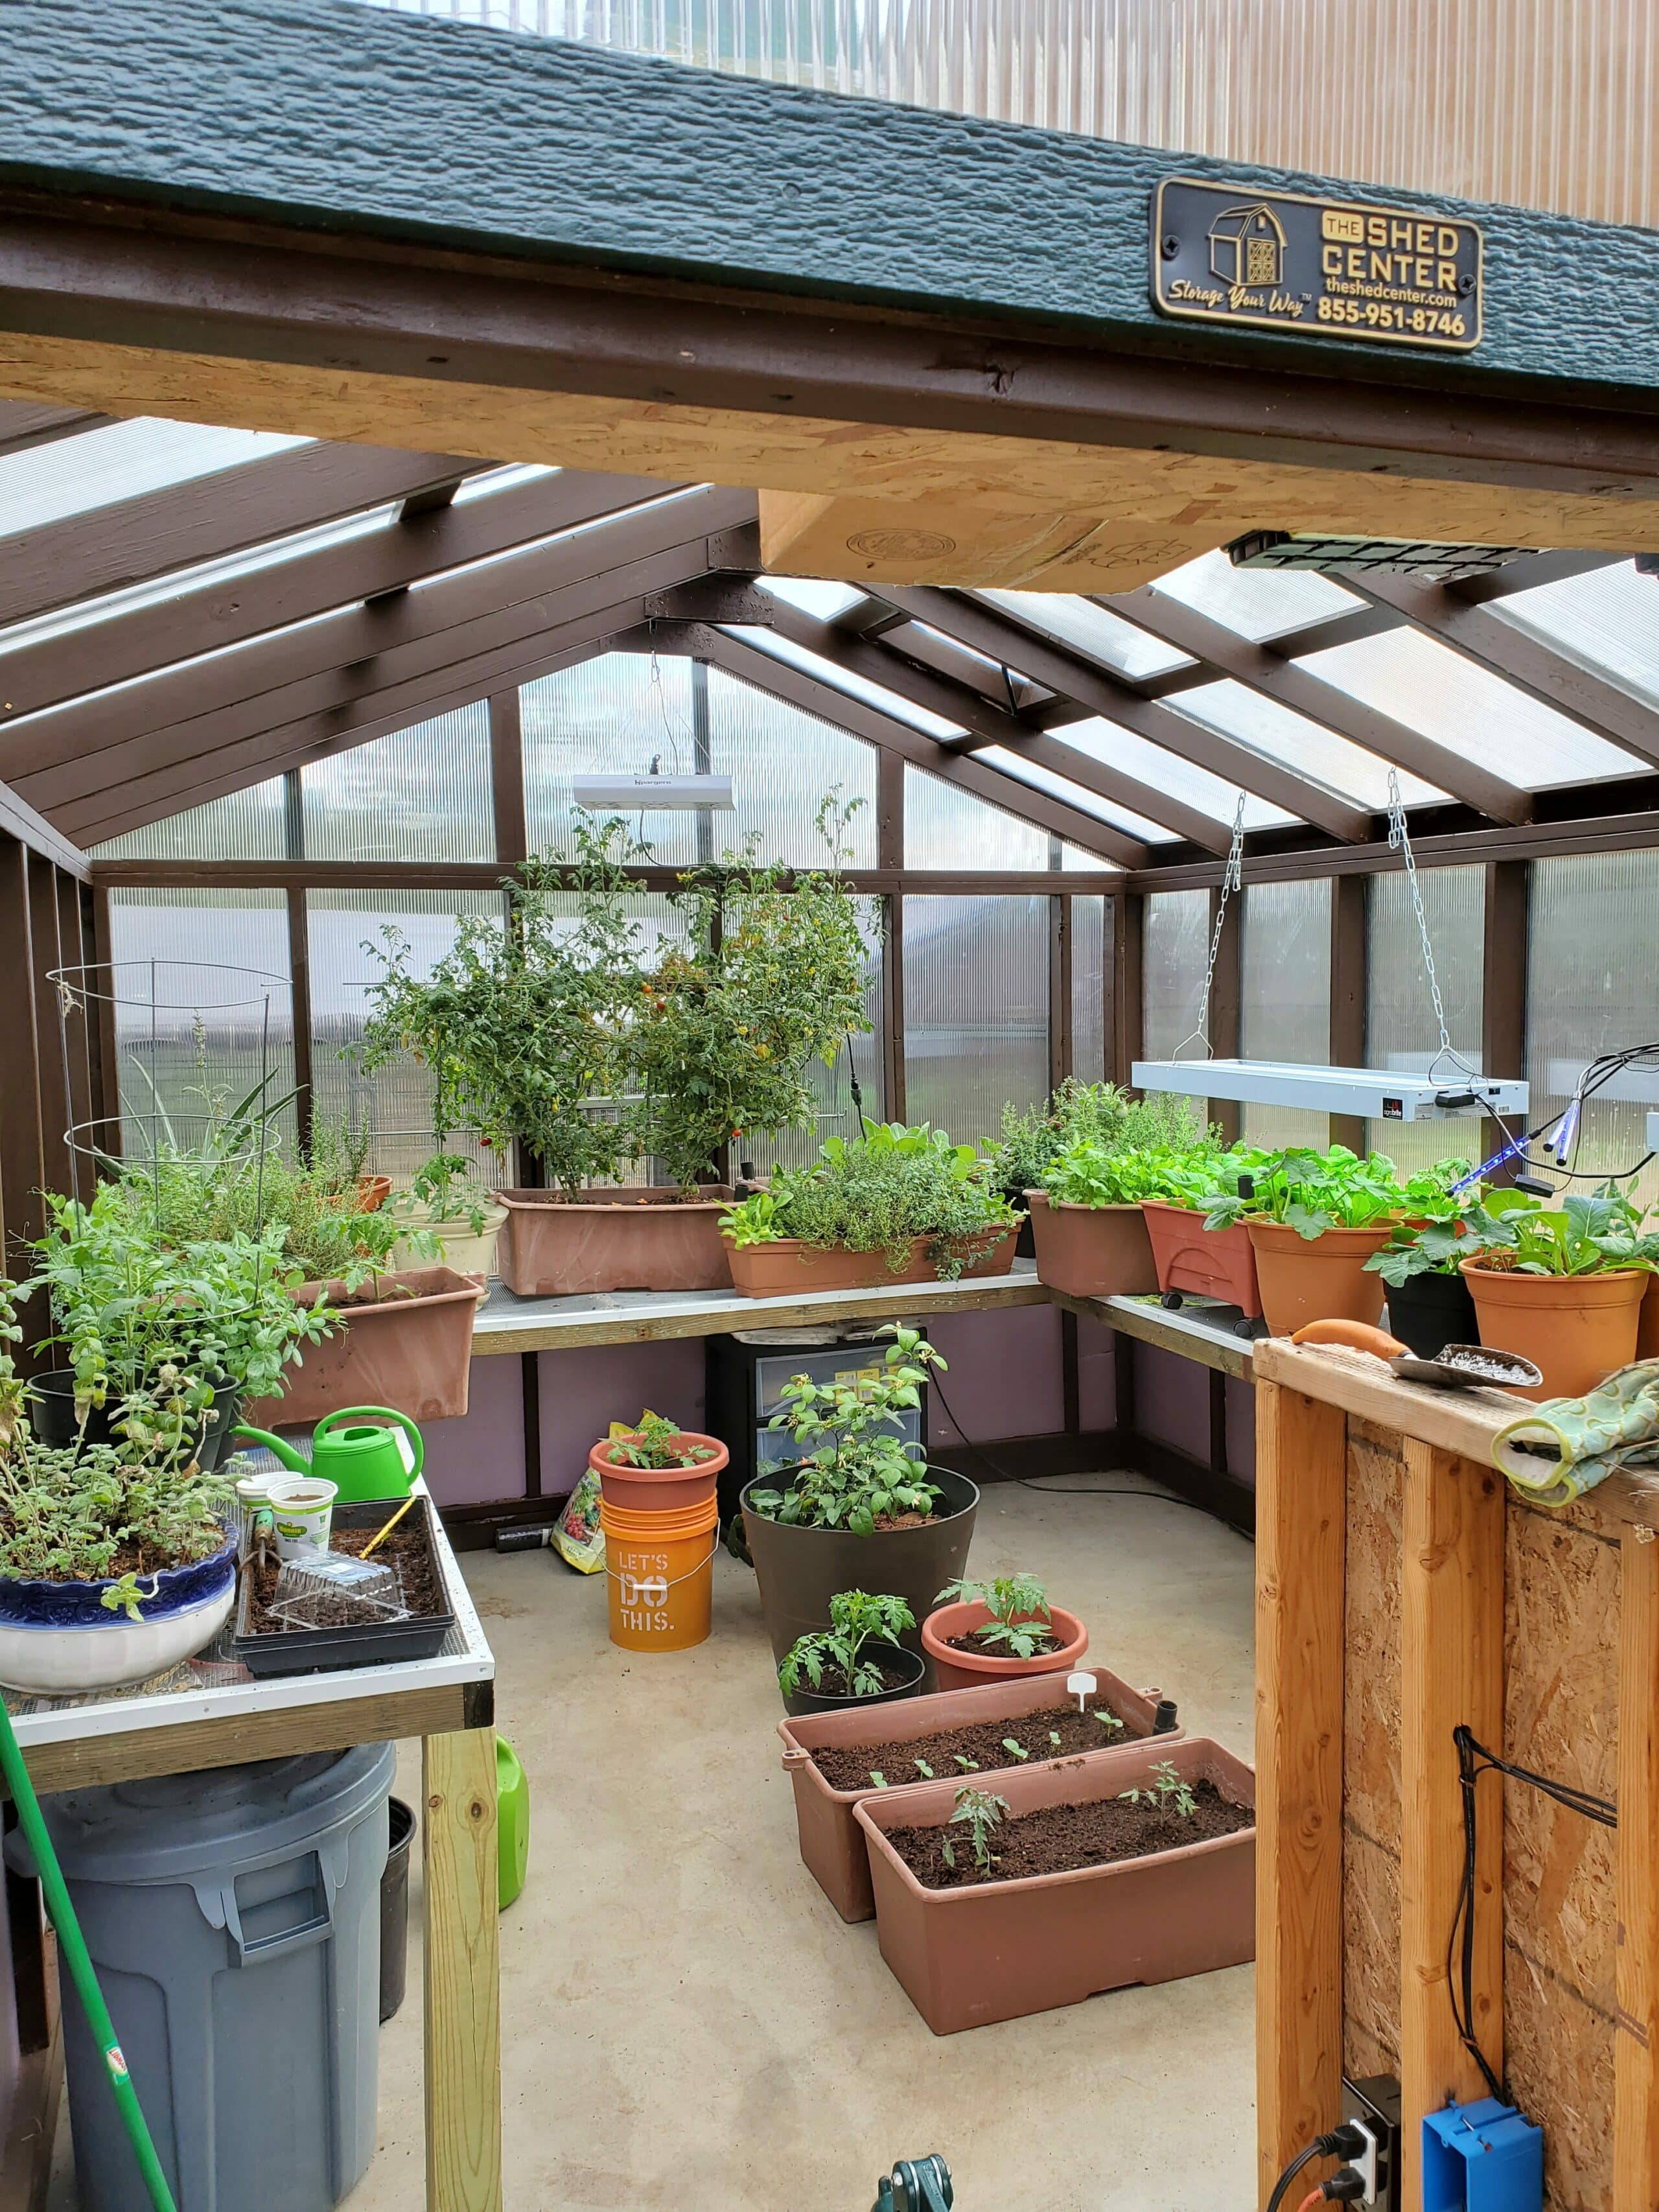 the shed center greenhouse